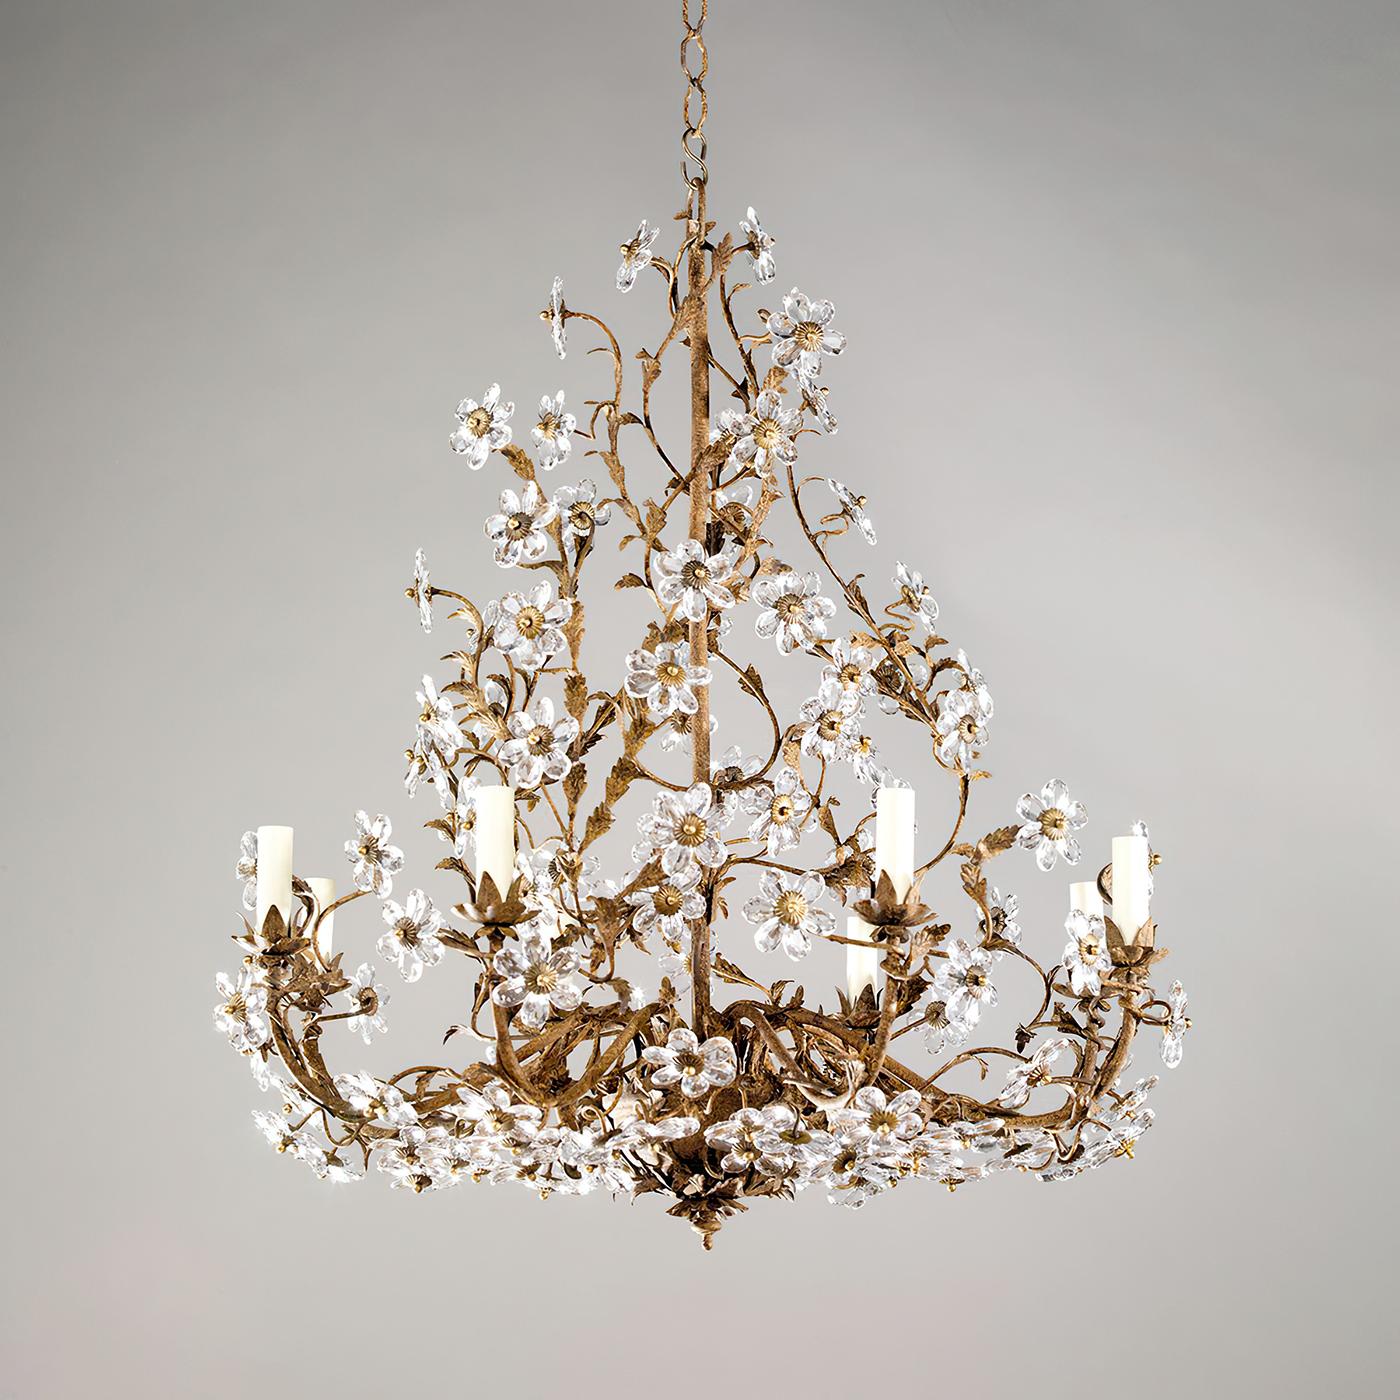 French Rococo rustic eight-light chandelier, the striking contrast of glass daisies with the gilt finish creates an organic feel and texture. Fabricated from a painted steel frame, with a patinated rust finish.

Dimensions: 29